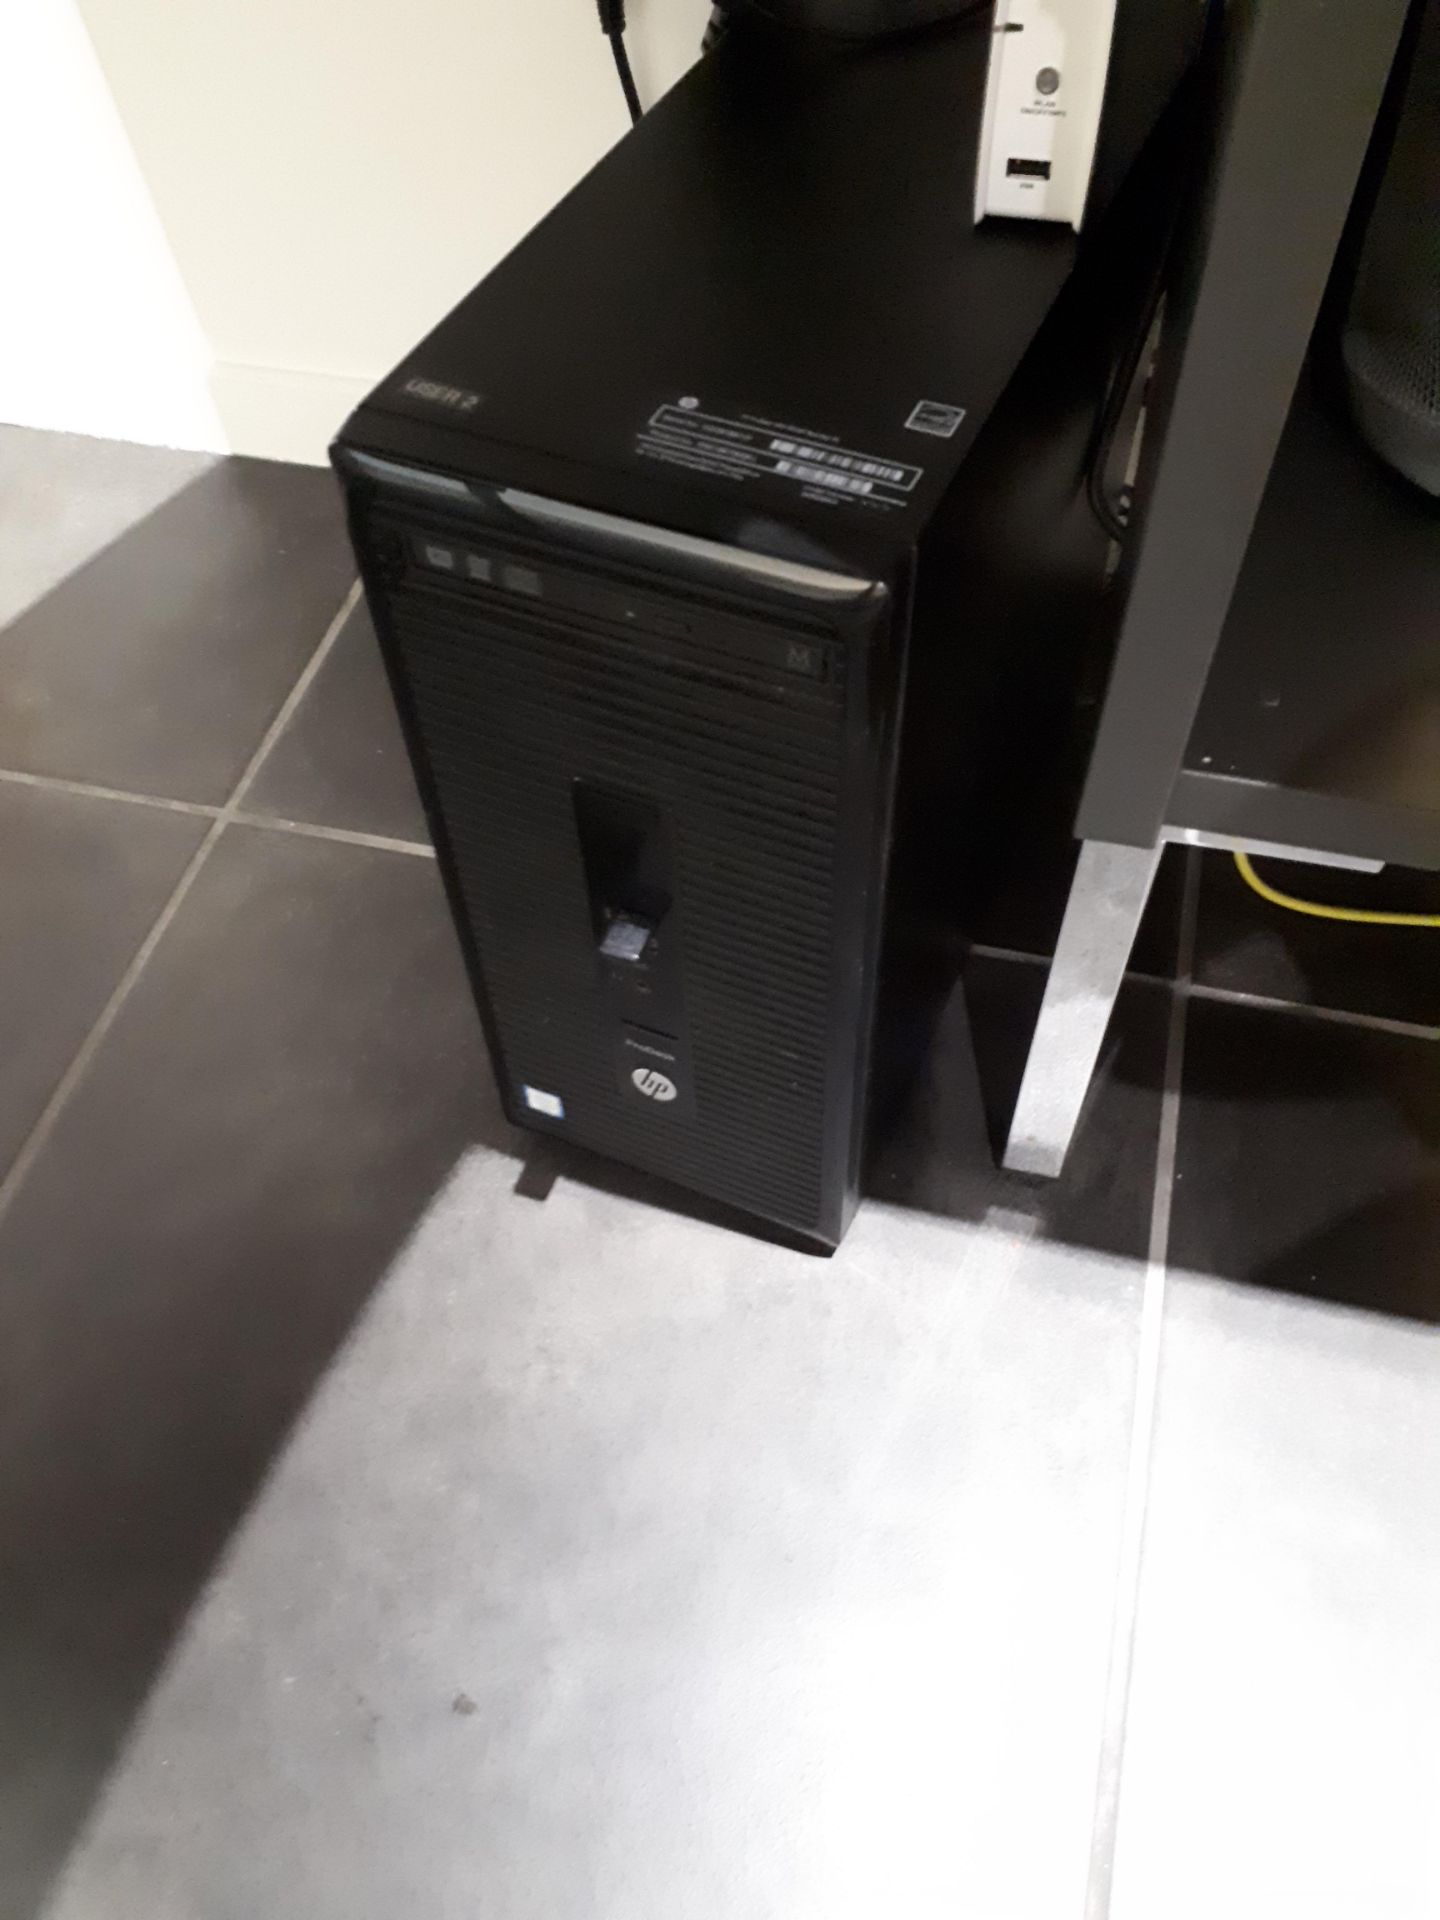 HP Prodesk Core i7 PC (HD Removed) with HP Pavilion 24XW Colour Monitor